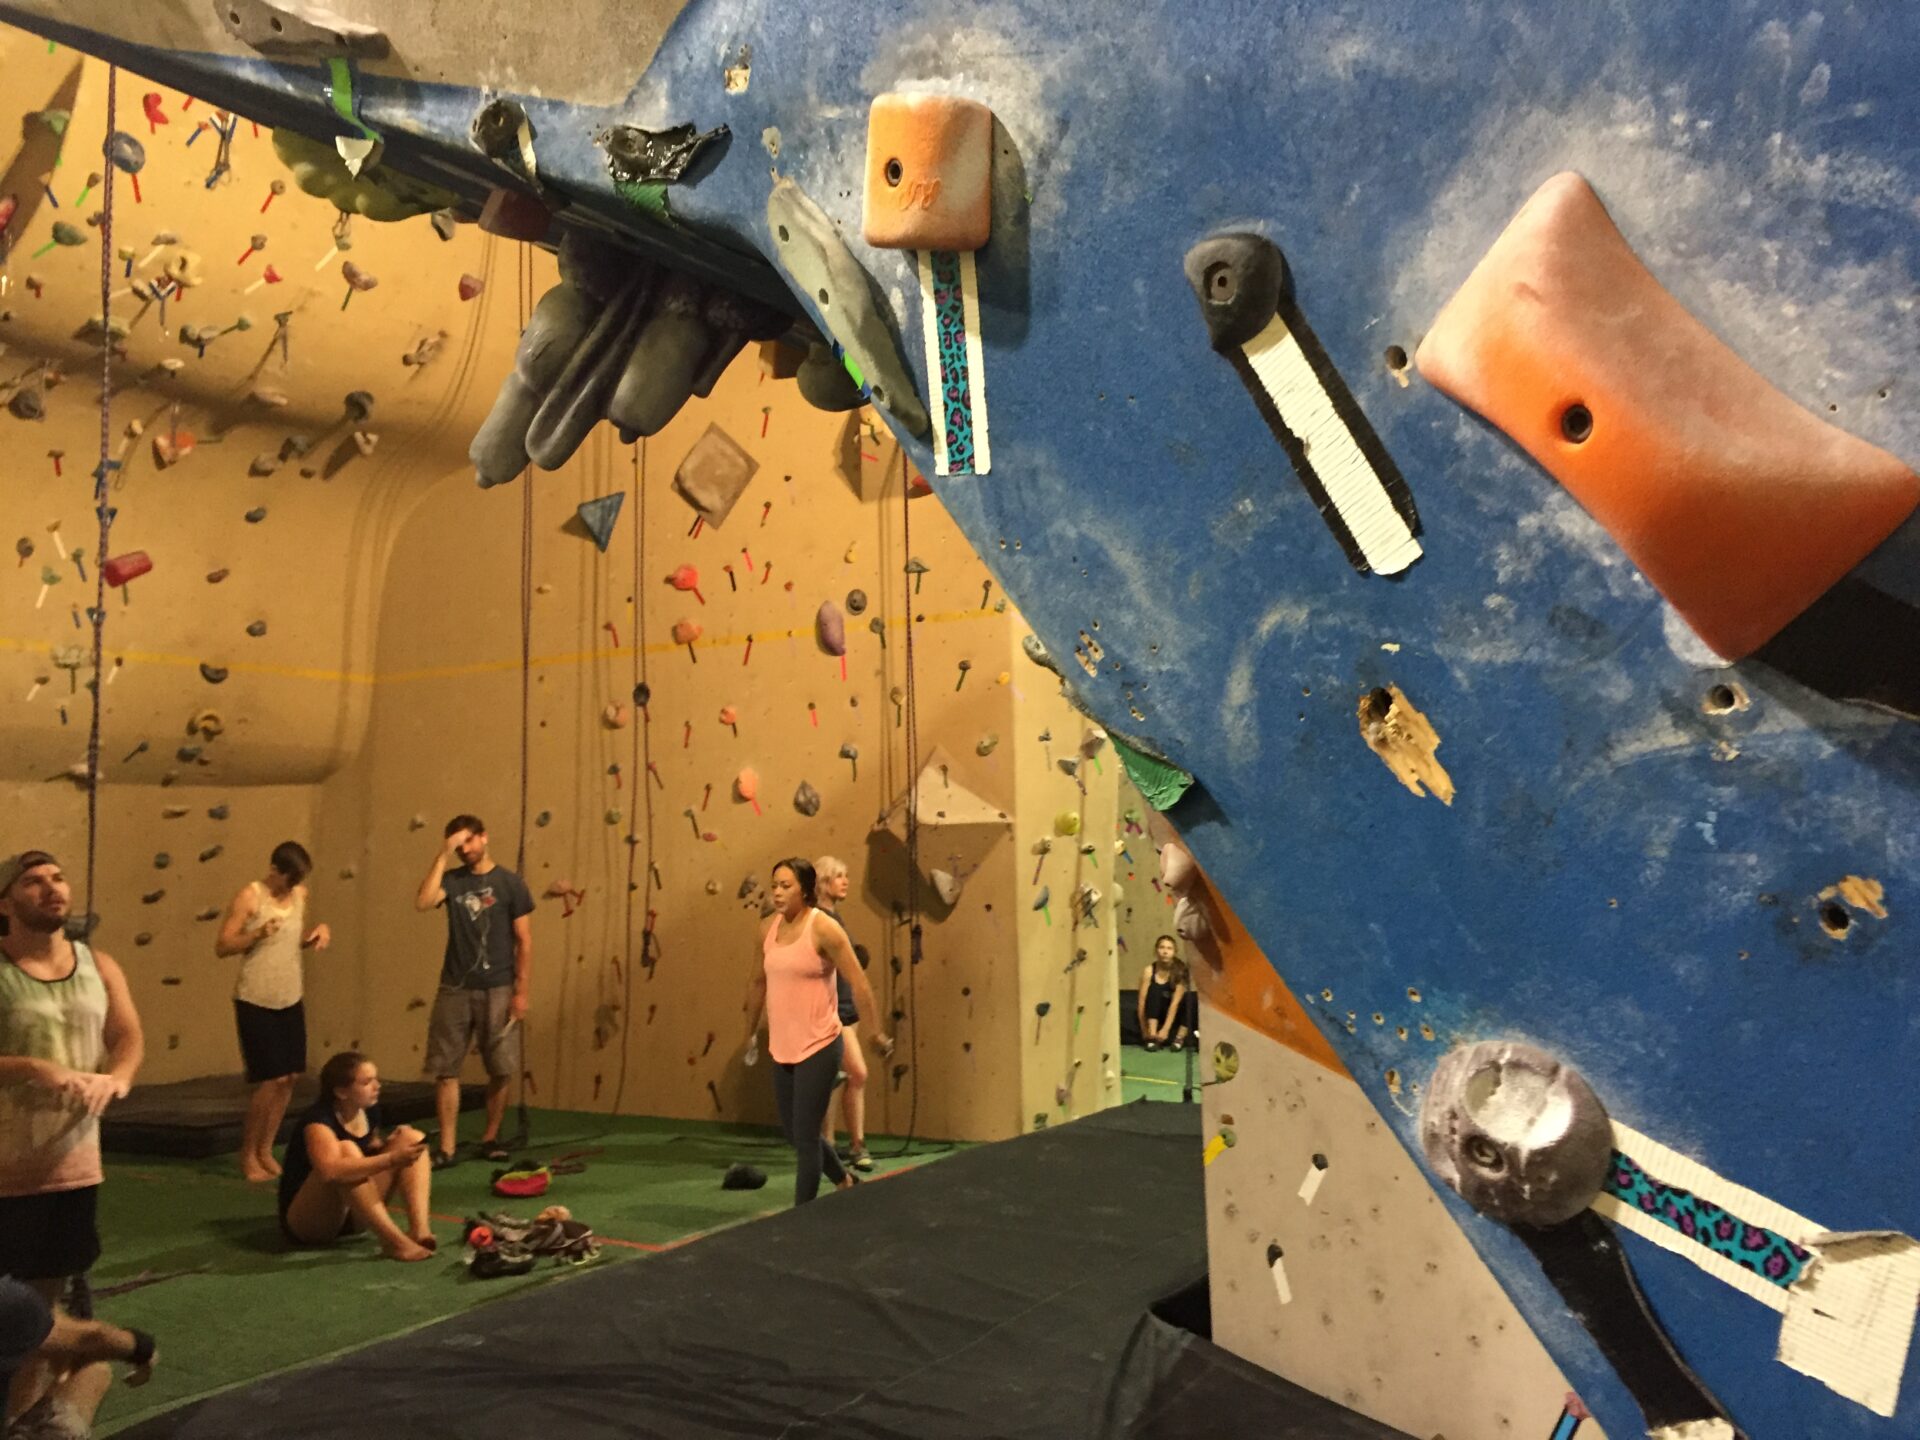 Project Climbing Center Abbotsford with #ExploreBCbyBus